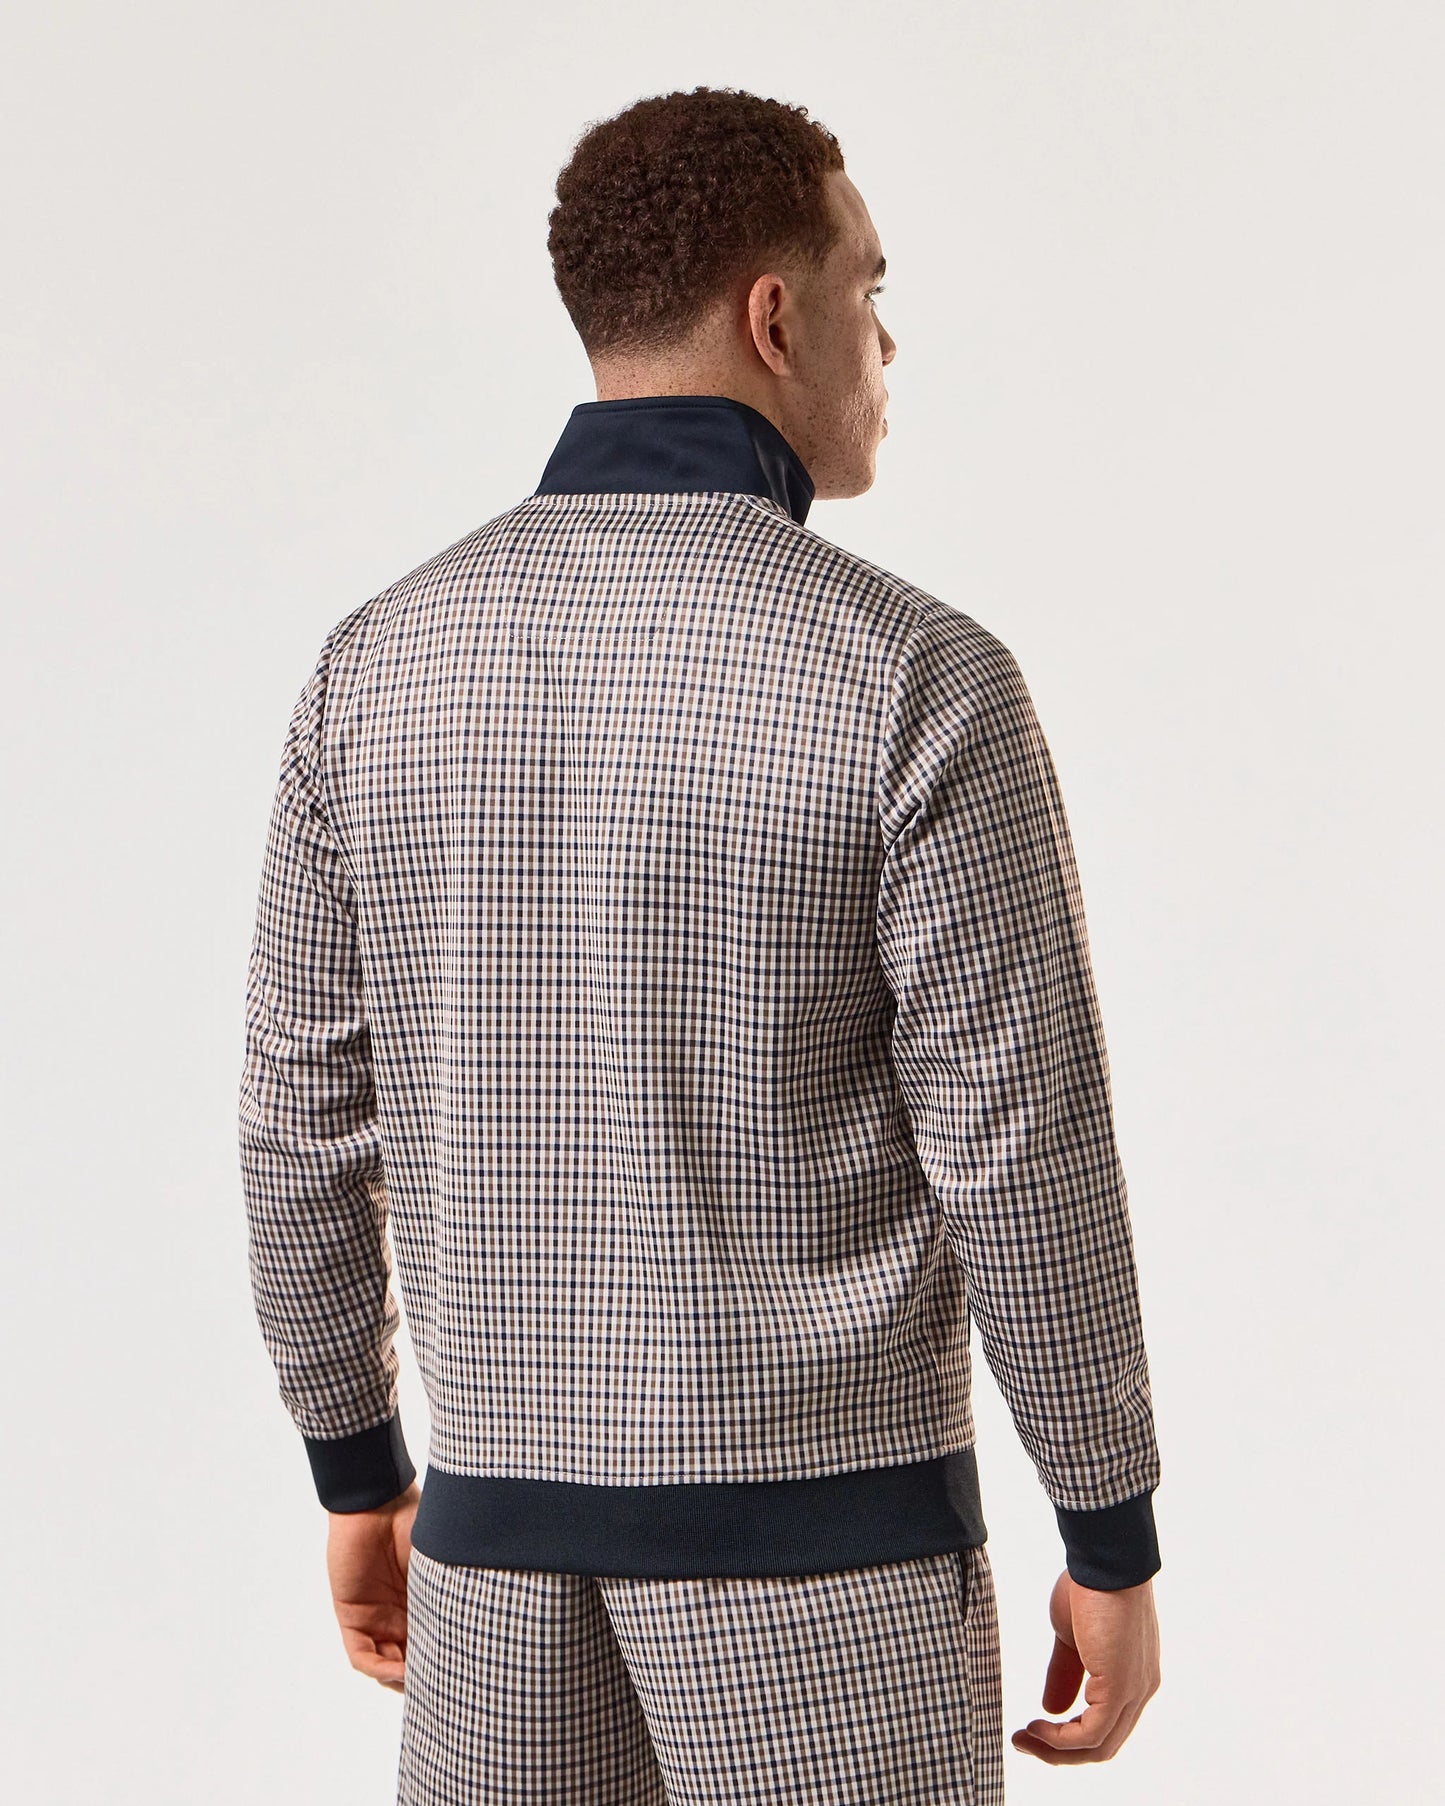 Weekend Offender - Placencia Track Top House Check